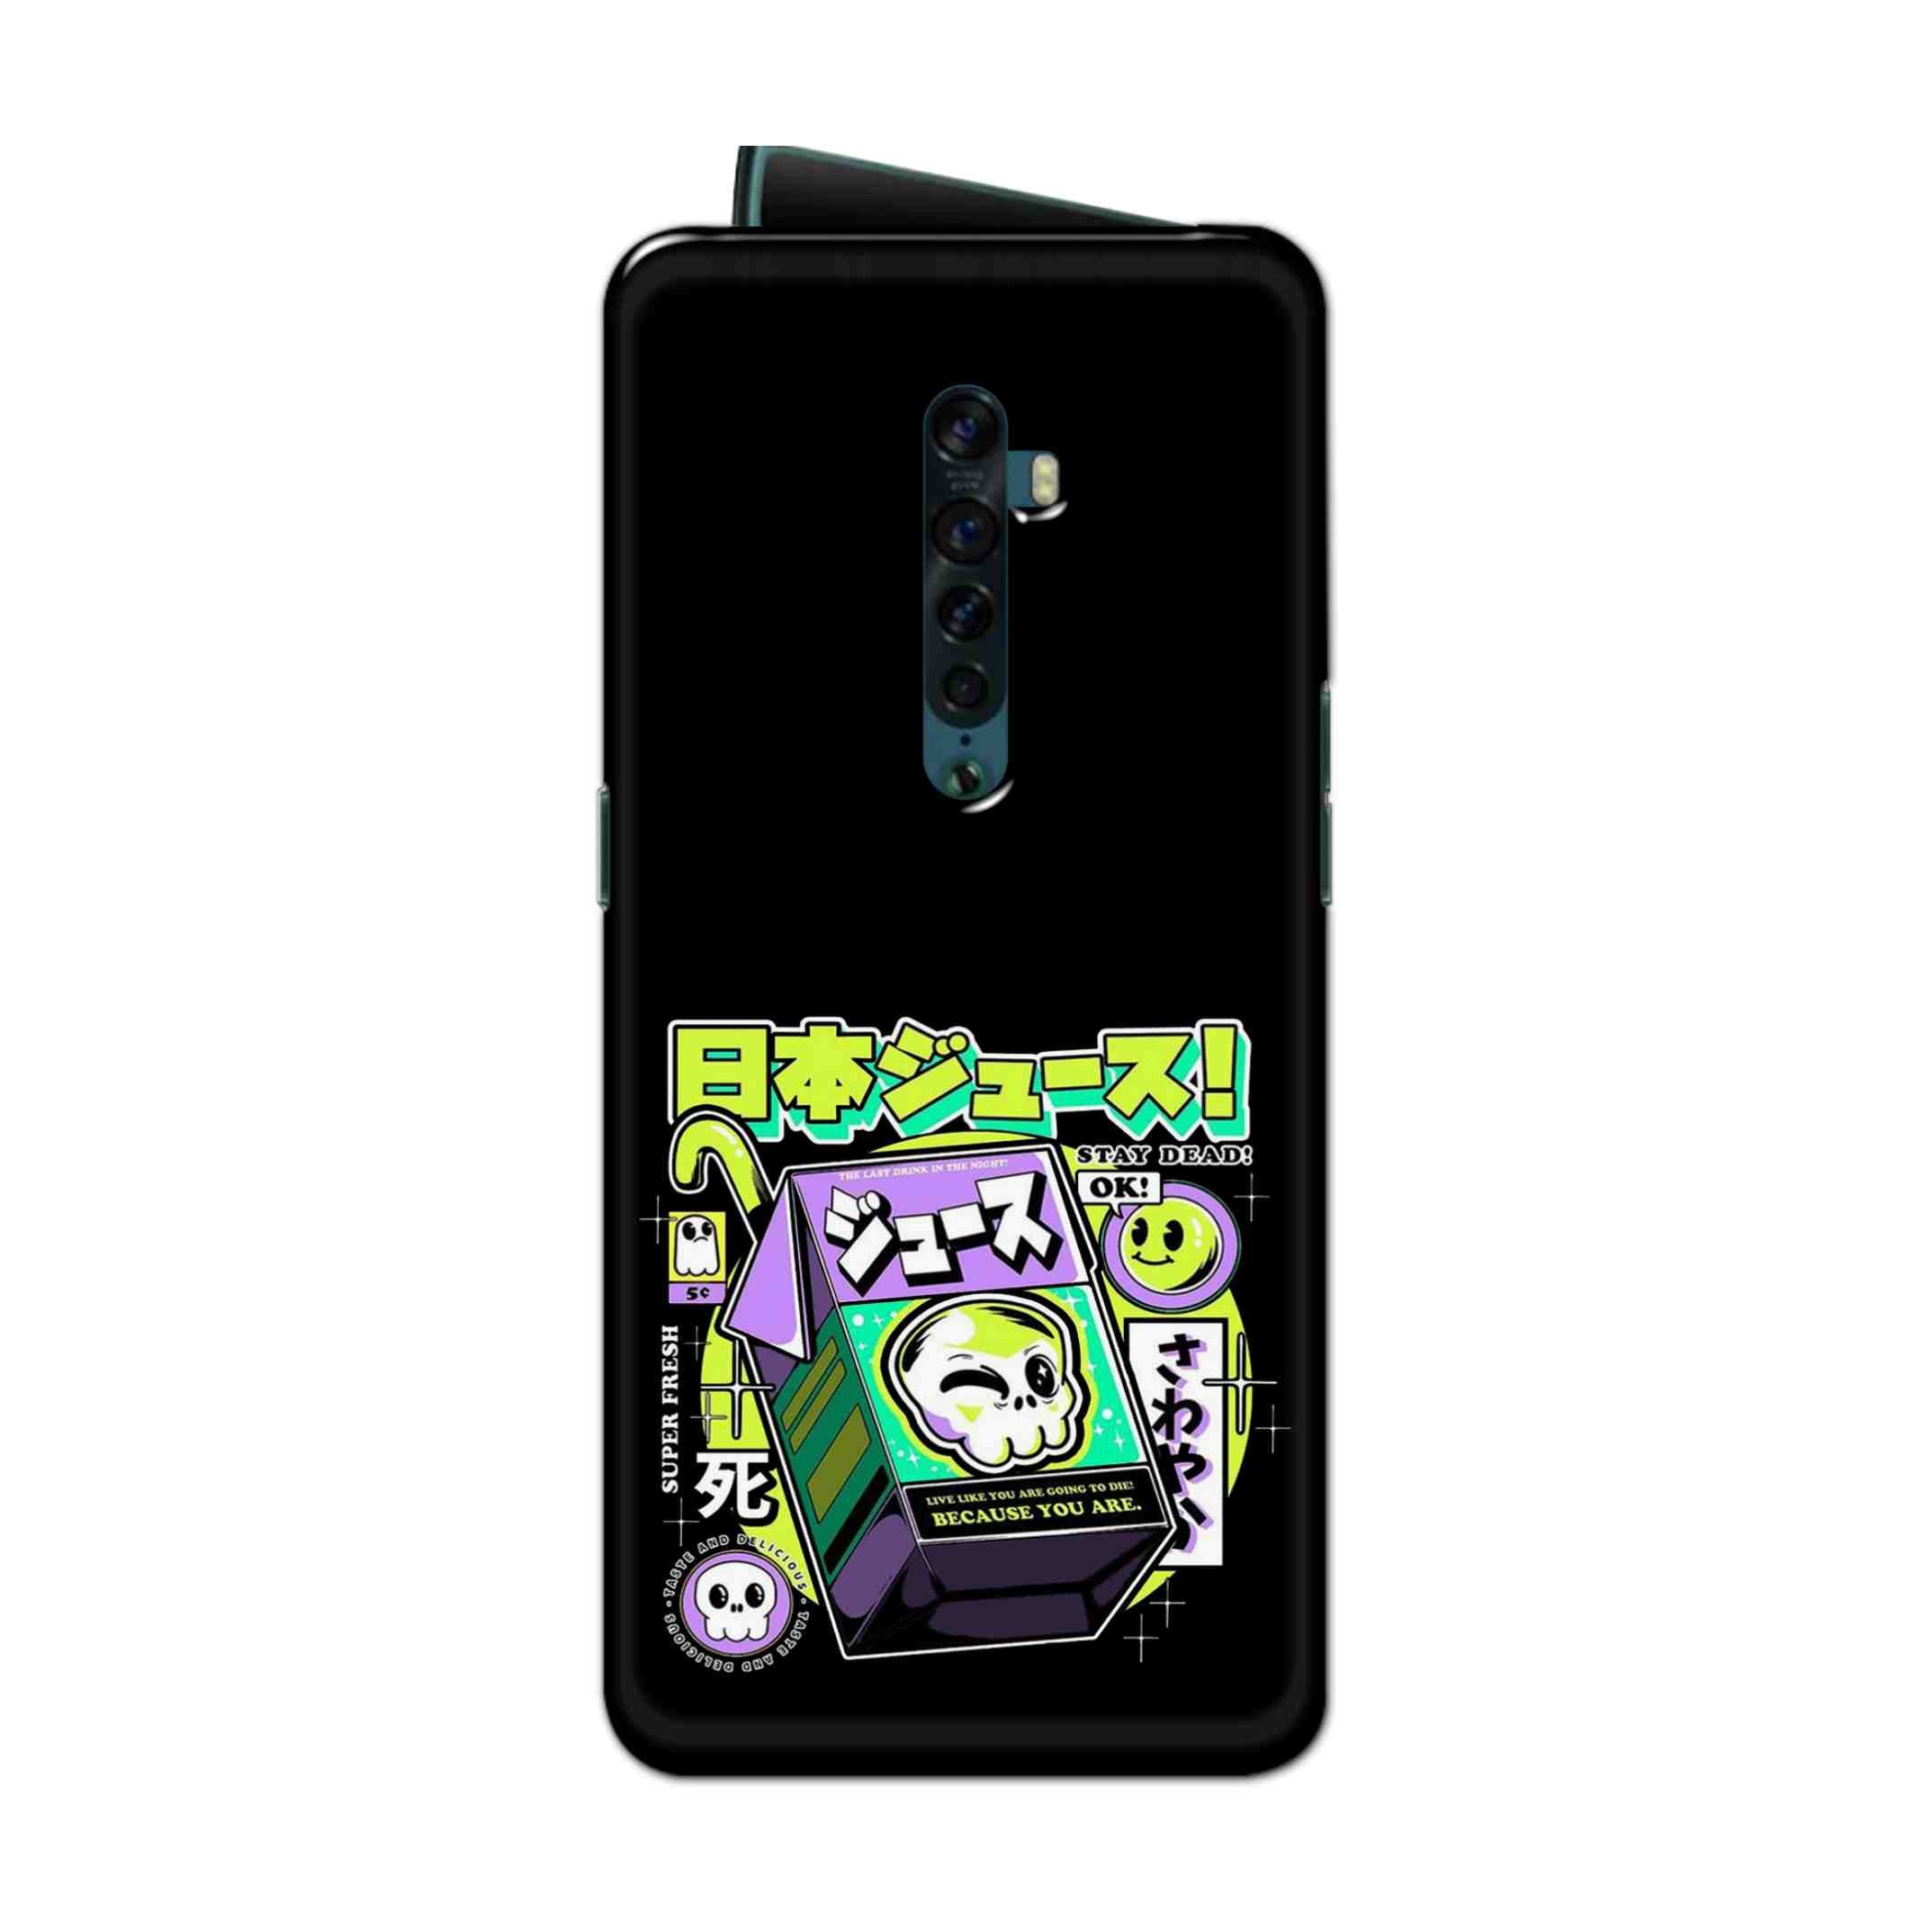 Buy Because You Are Hard Back Mobile Phone Case Cover For Oppo Reno 2 Online